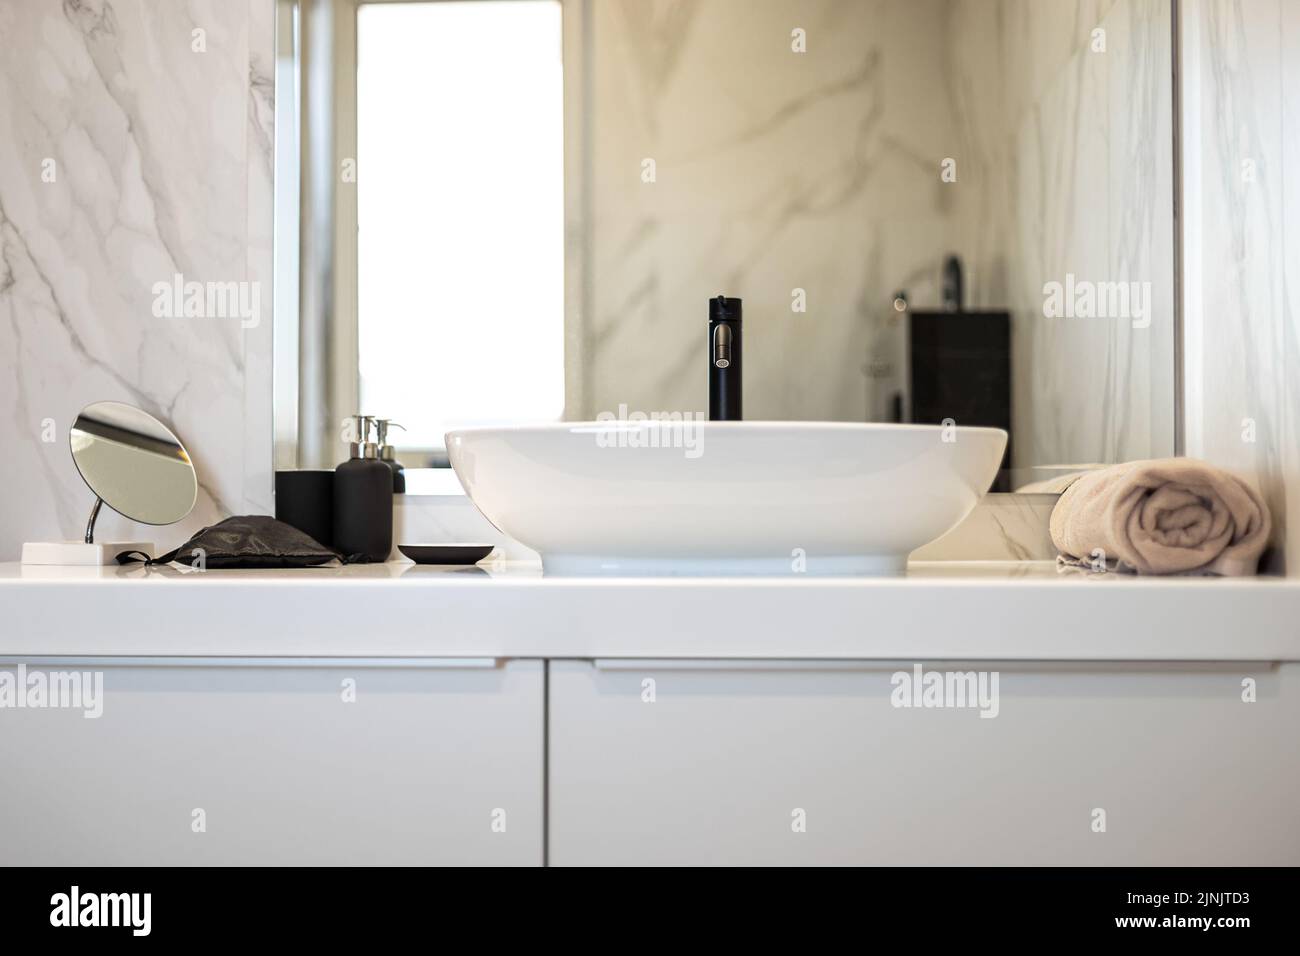 Modern washbasin with black faucet beside a stylish soap dispenser. Stock Photo